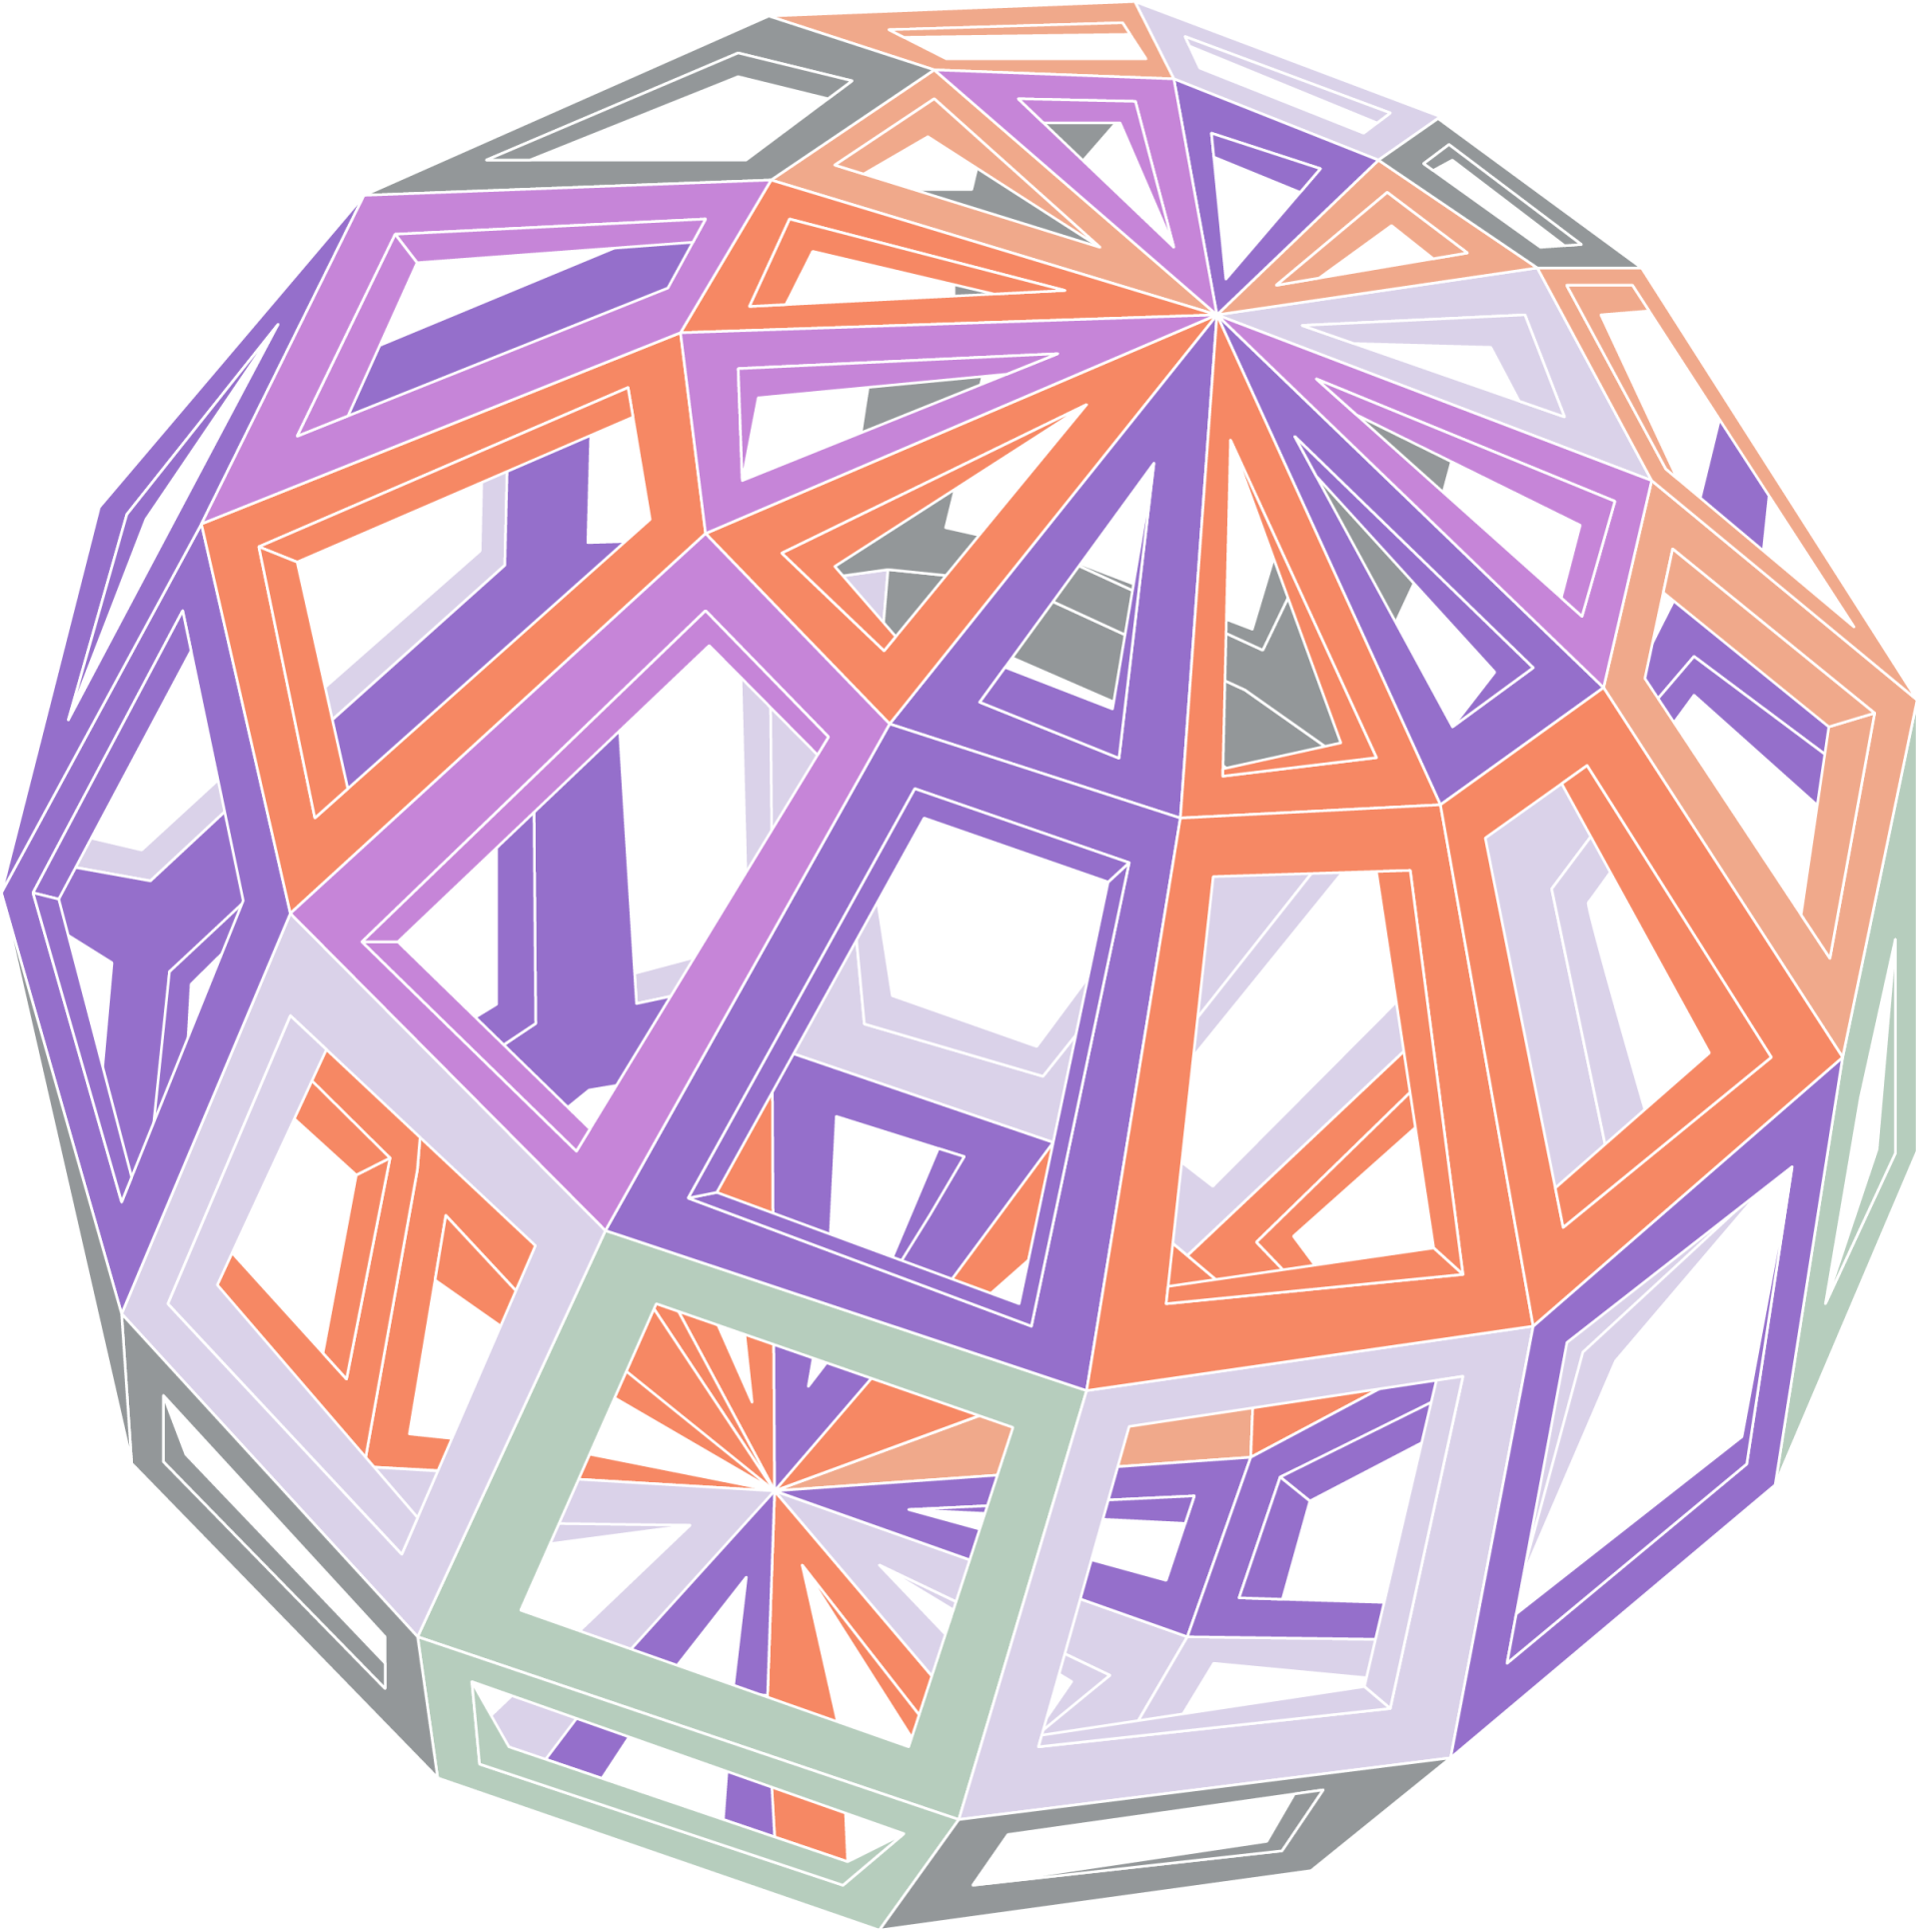 A drawing of a sphere made up of squares and triangles